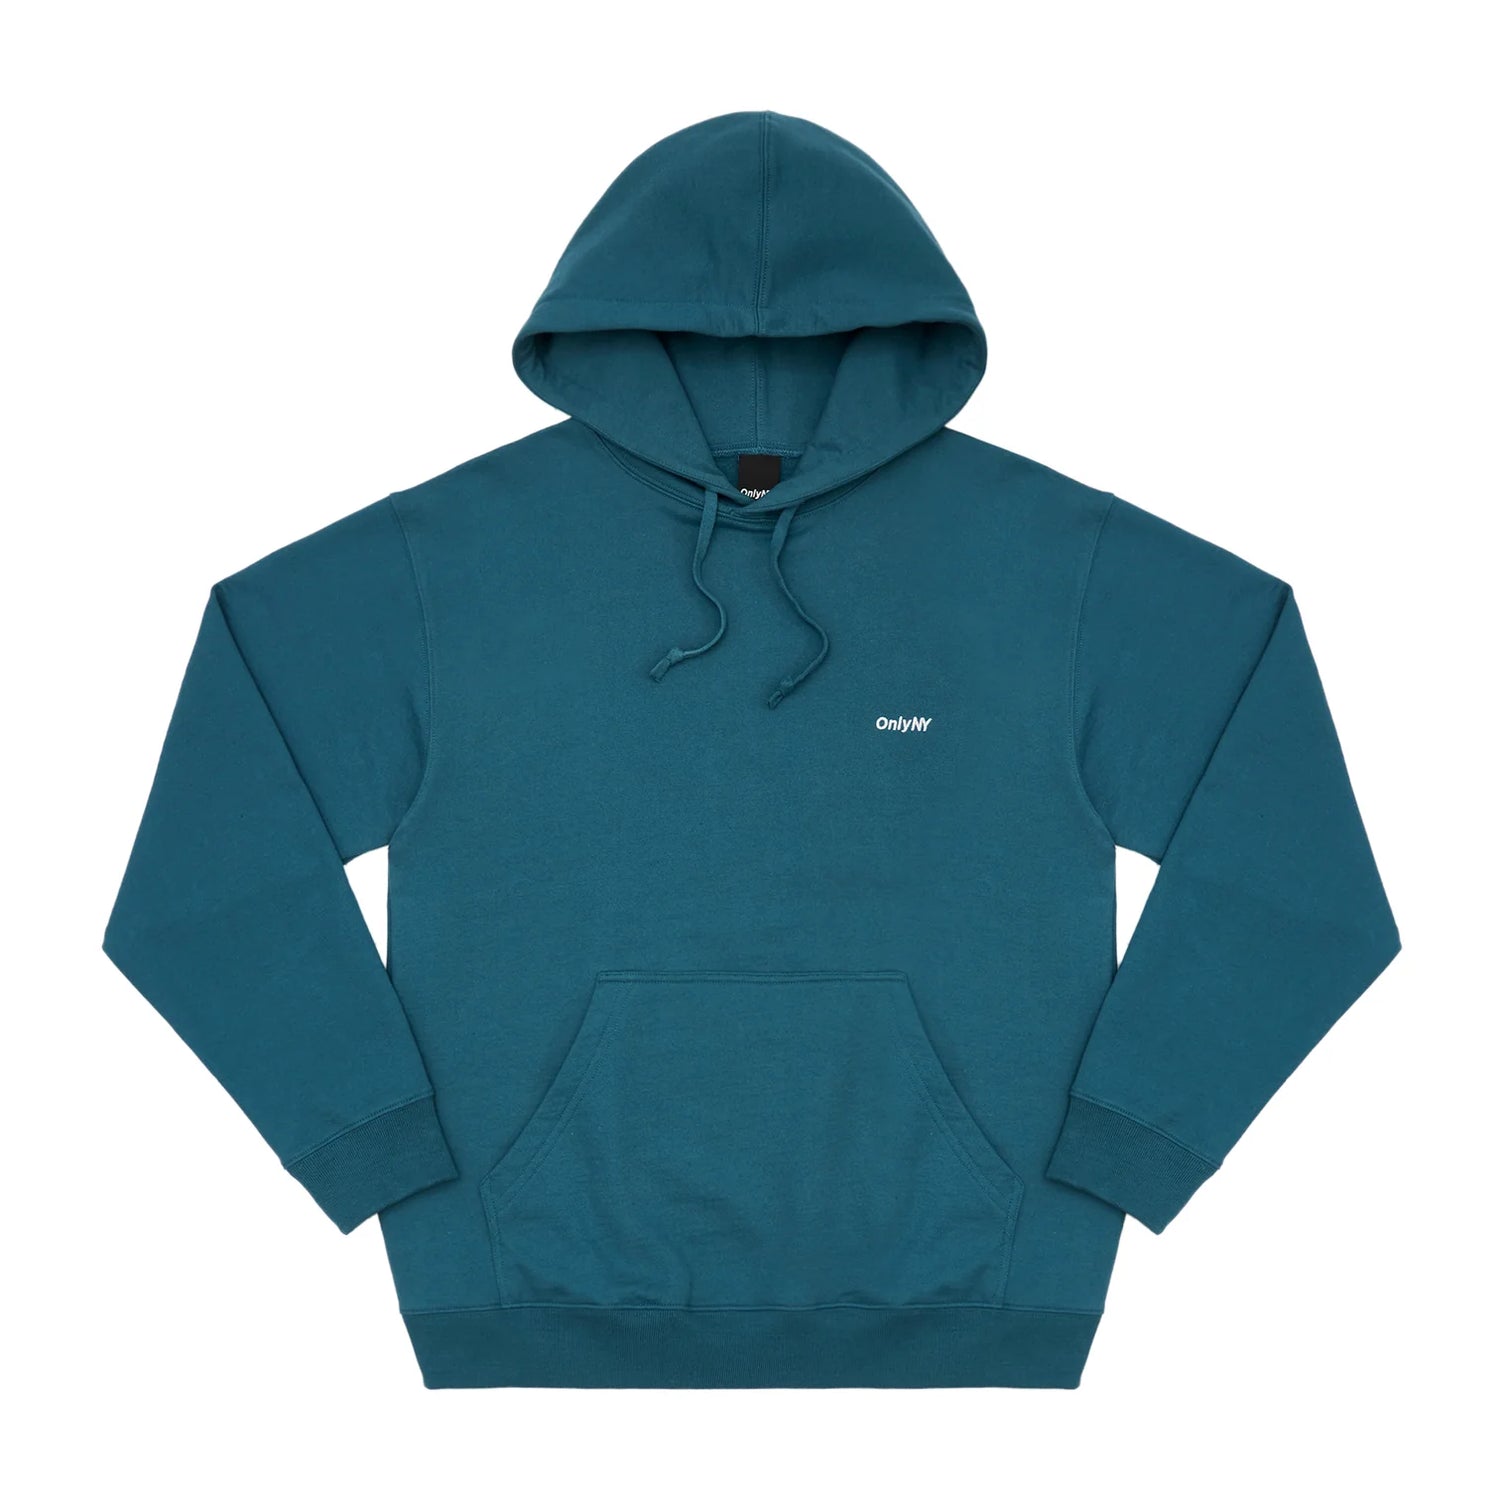 Only NY Core Logo Hoodie - Teal